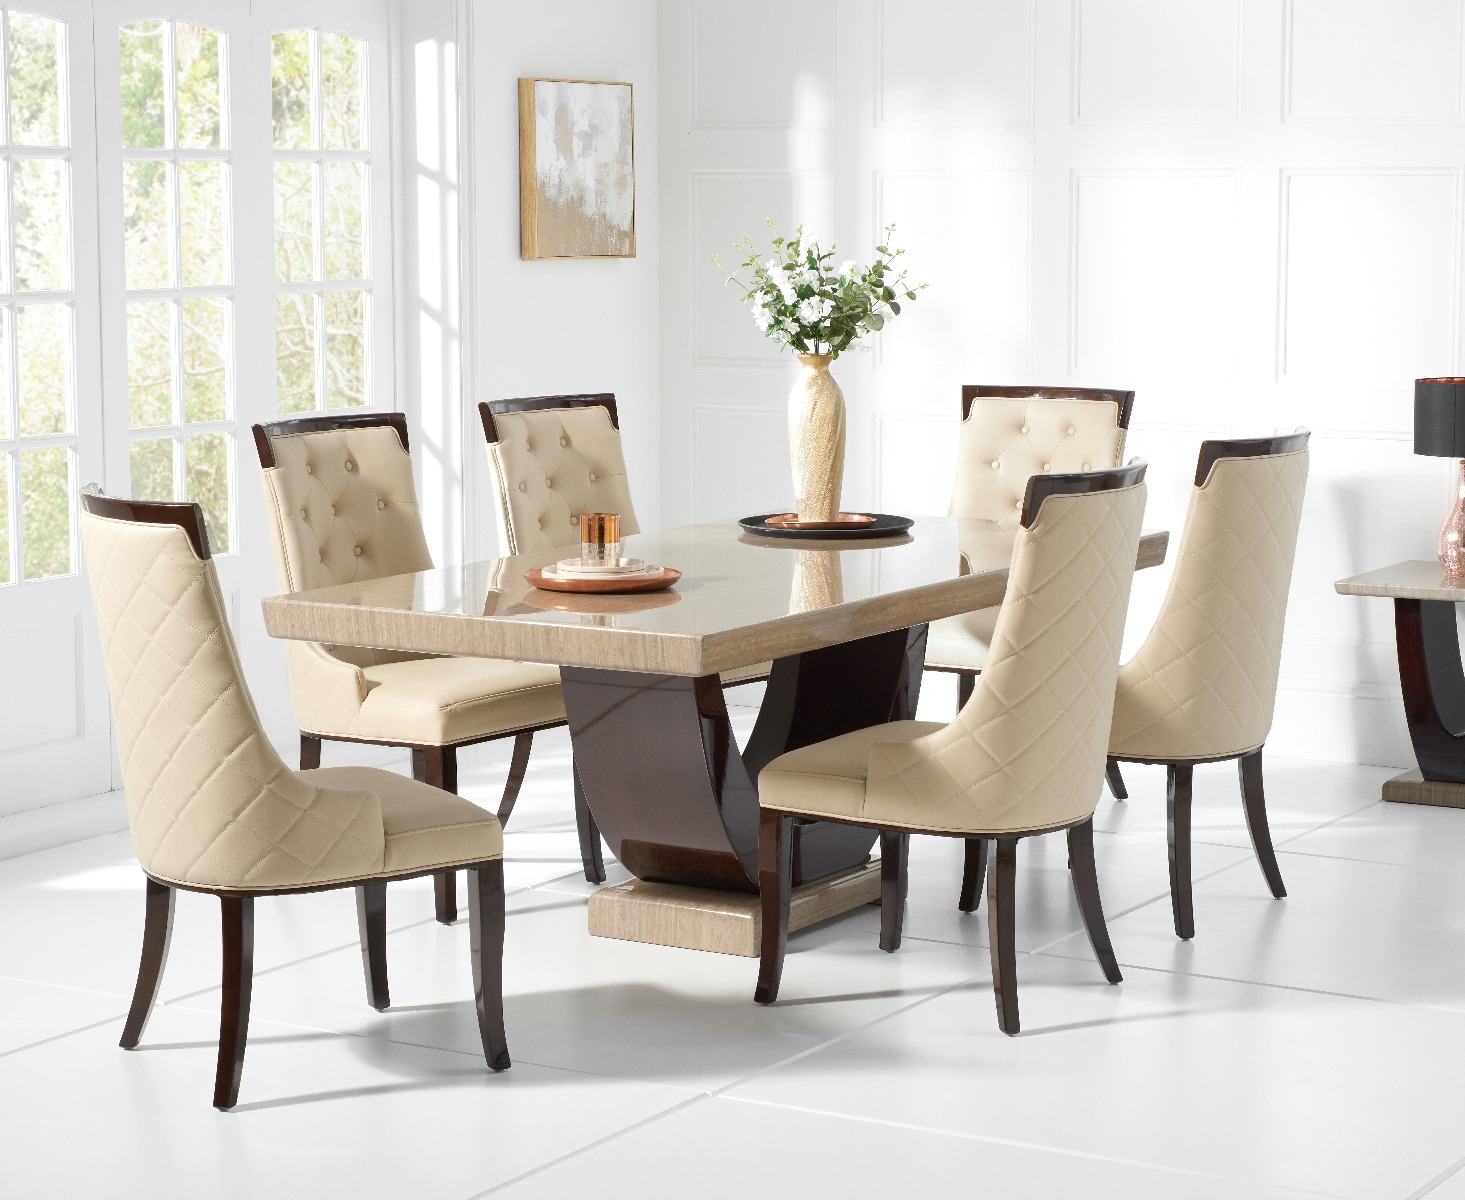 Novara 170cm Brown Pedestal Marble Dining Table With 6 Grey Francesca Chairs